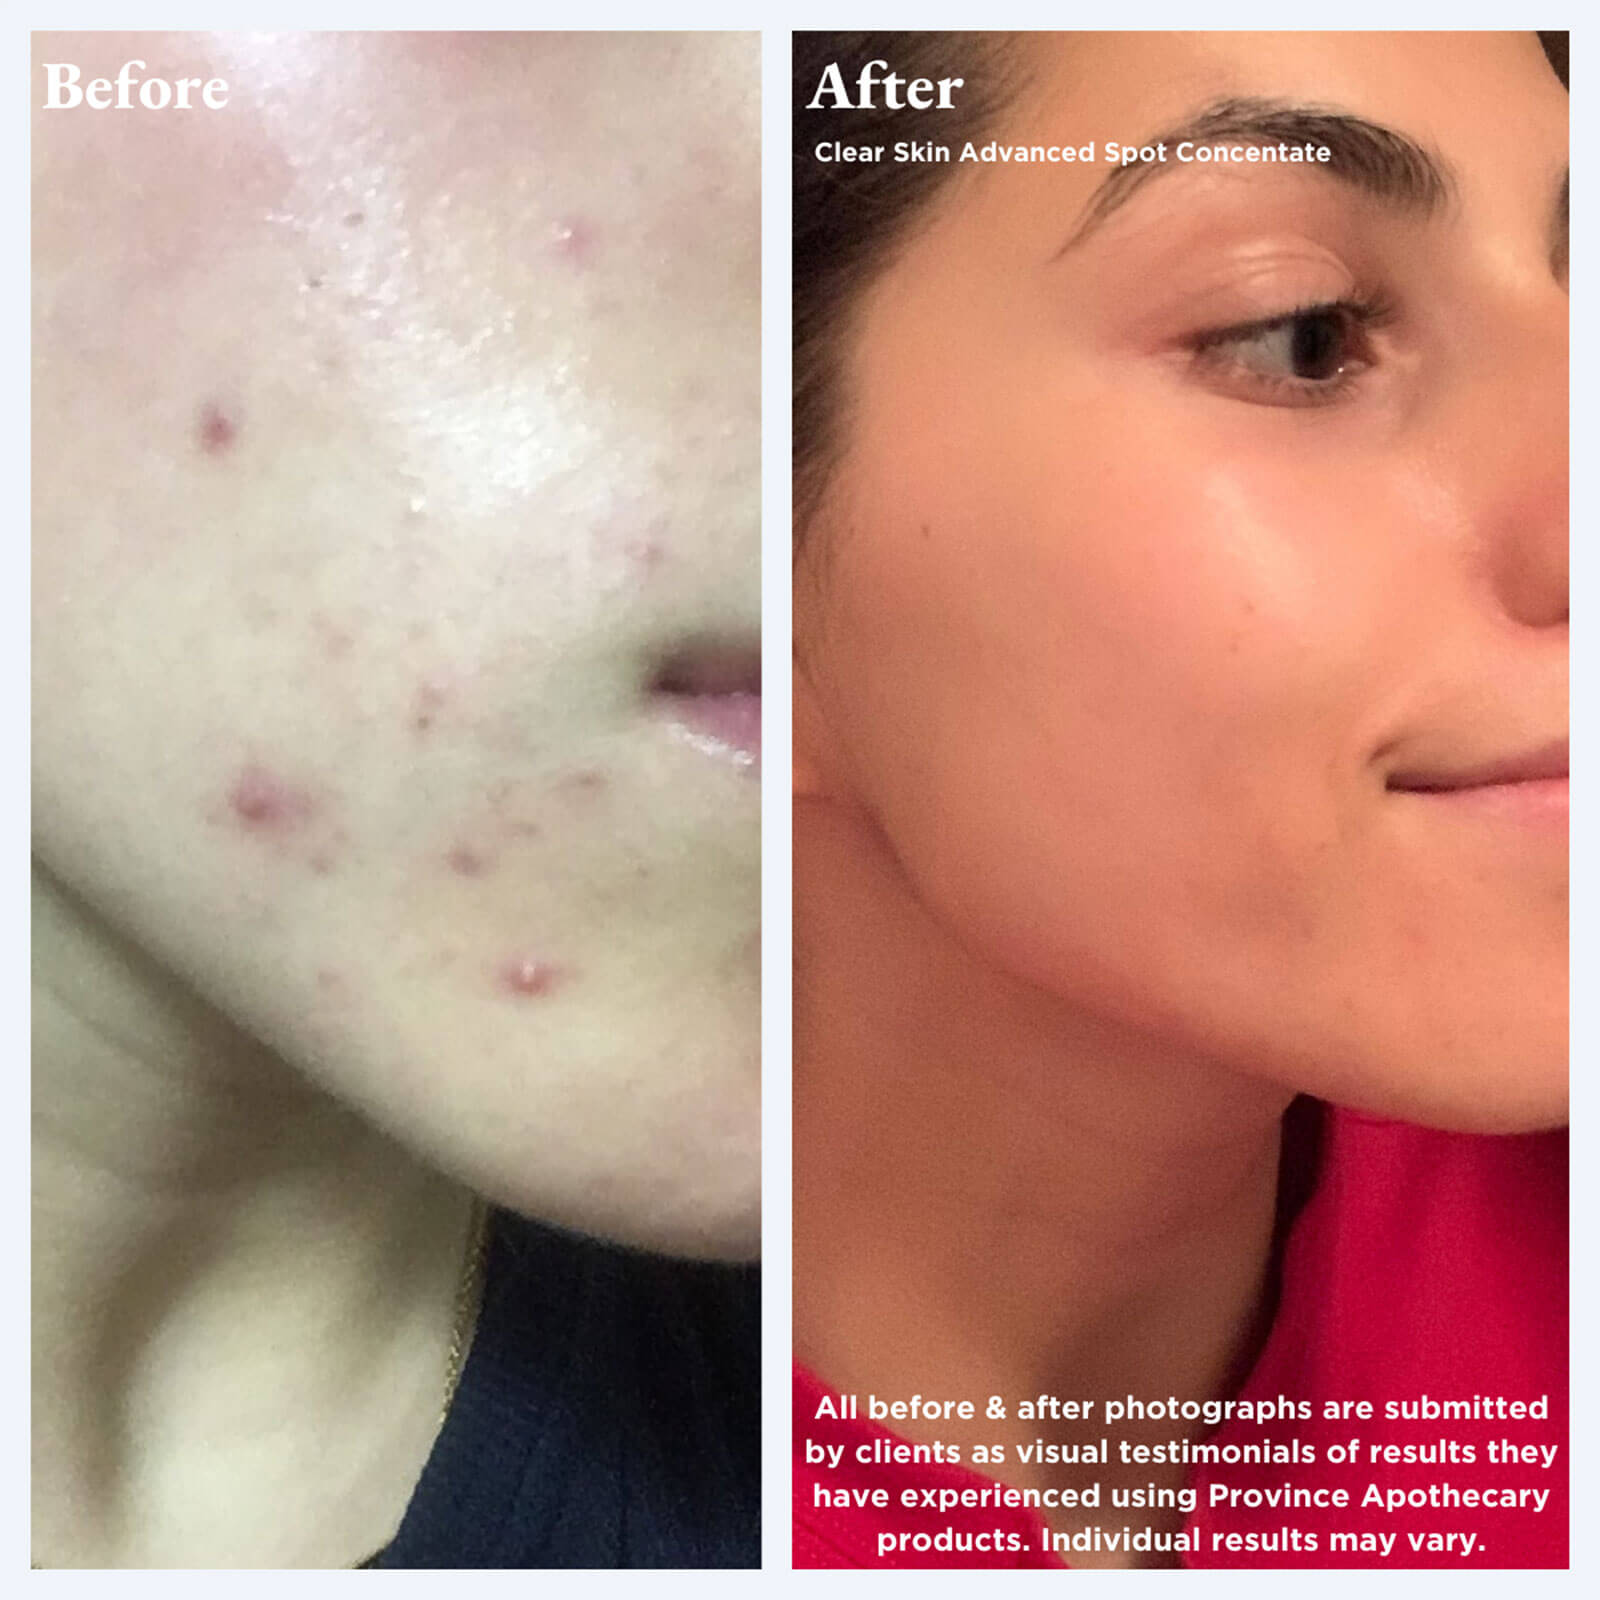 Clear Skin Advanced Spot Concentrate - Before & After